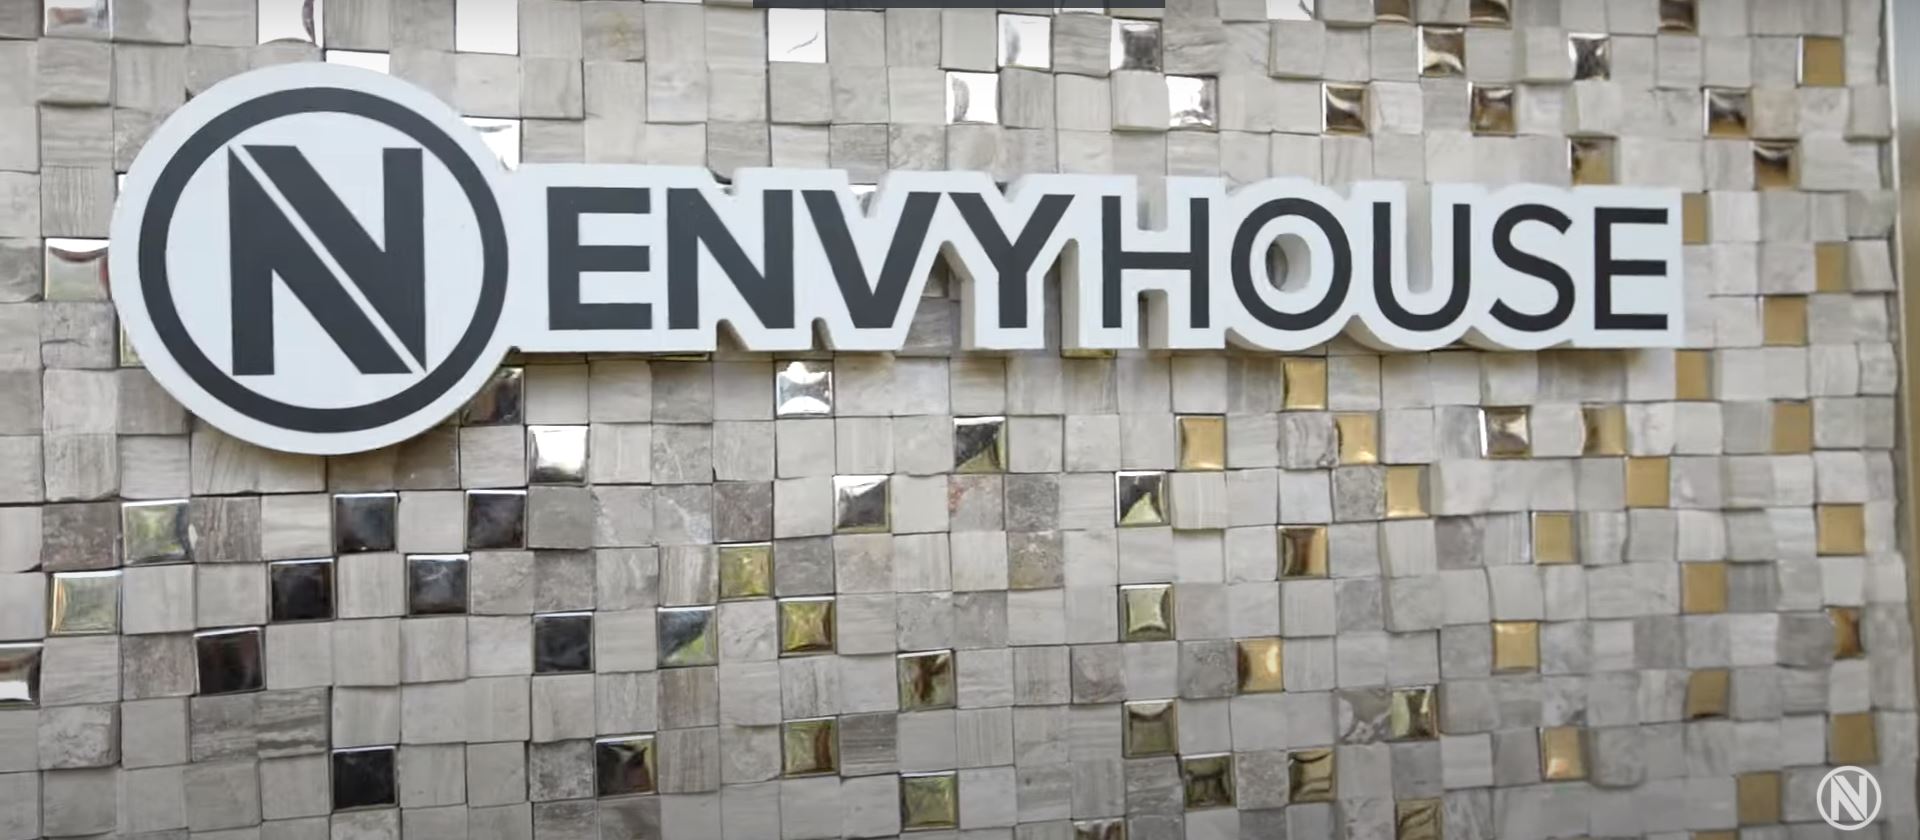 ENVY House Podcast Clip, Happy A̶p̶r̶i̶l̶ ̶F̶o̶o̶l̶'̶s ENVY House Podcast  Day Alex Botez, Andrea Botez, and CodeMiko talk about the behind the scenes  work that goes into, By Team Envy